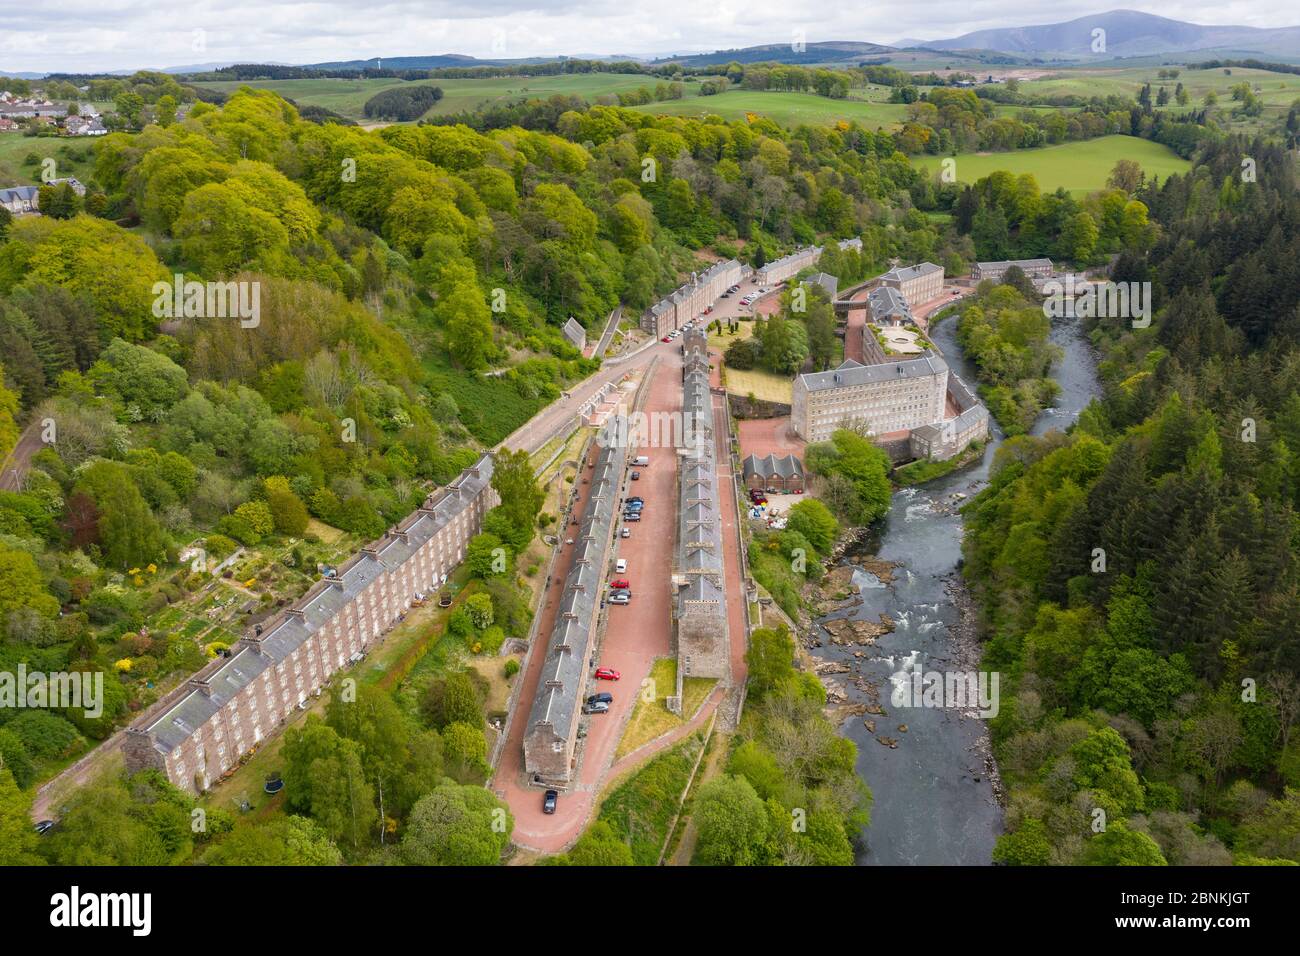 Aerial view of New Lanark World Heritage Site closed during covid-19 lockdown, beside River Clyde in South Lanarkshire, Scotland, UK Stock Photo